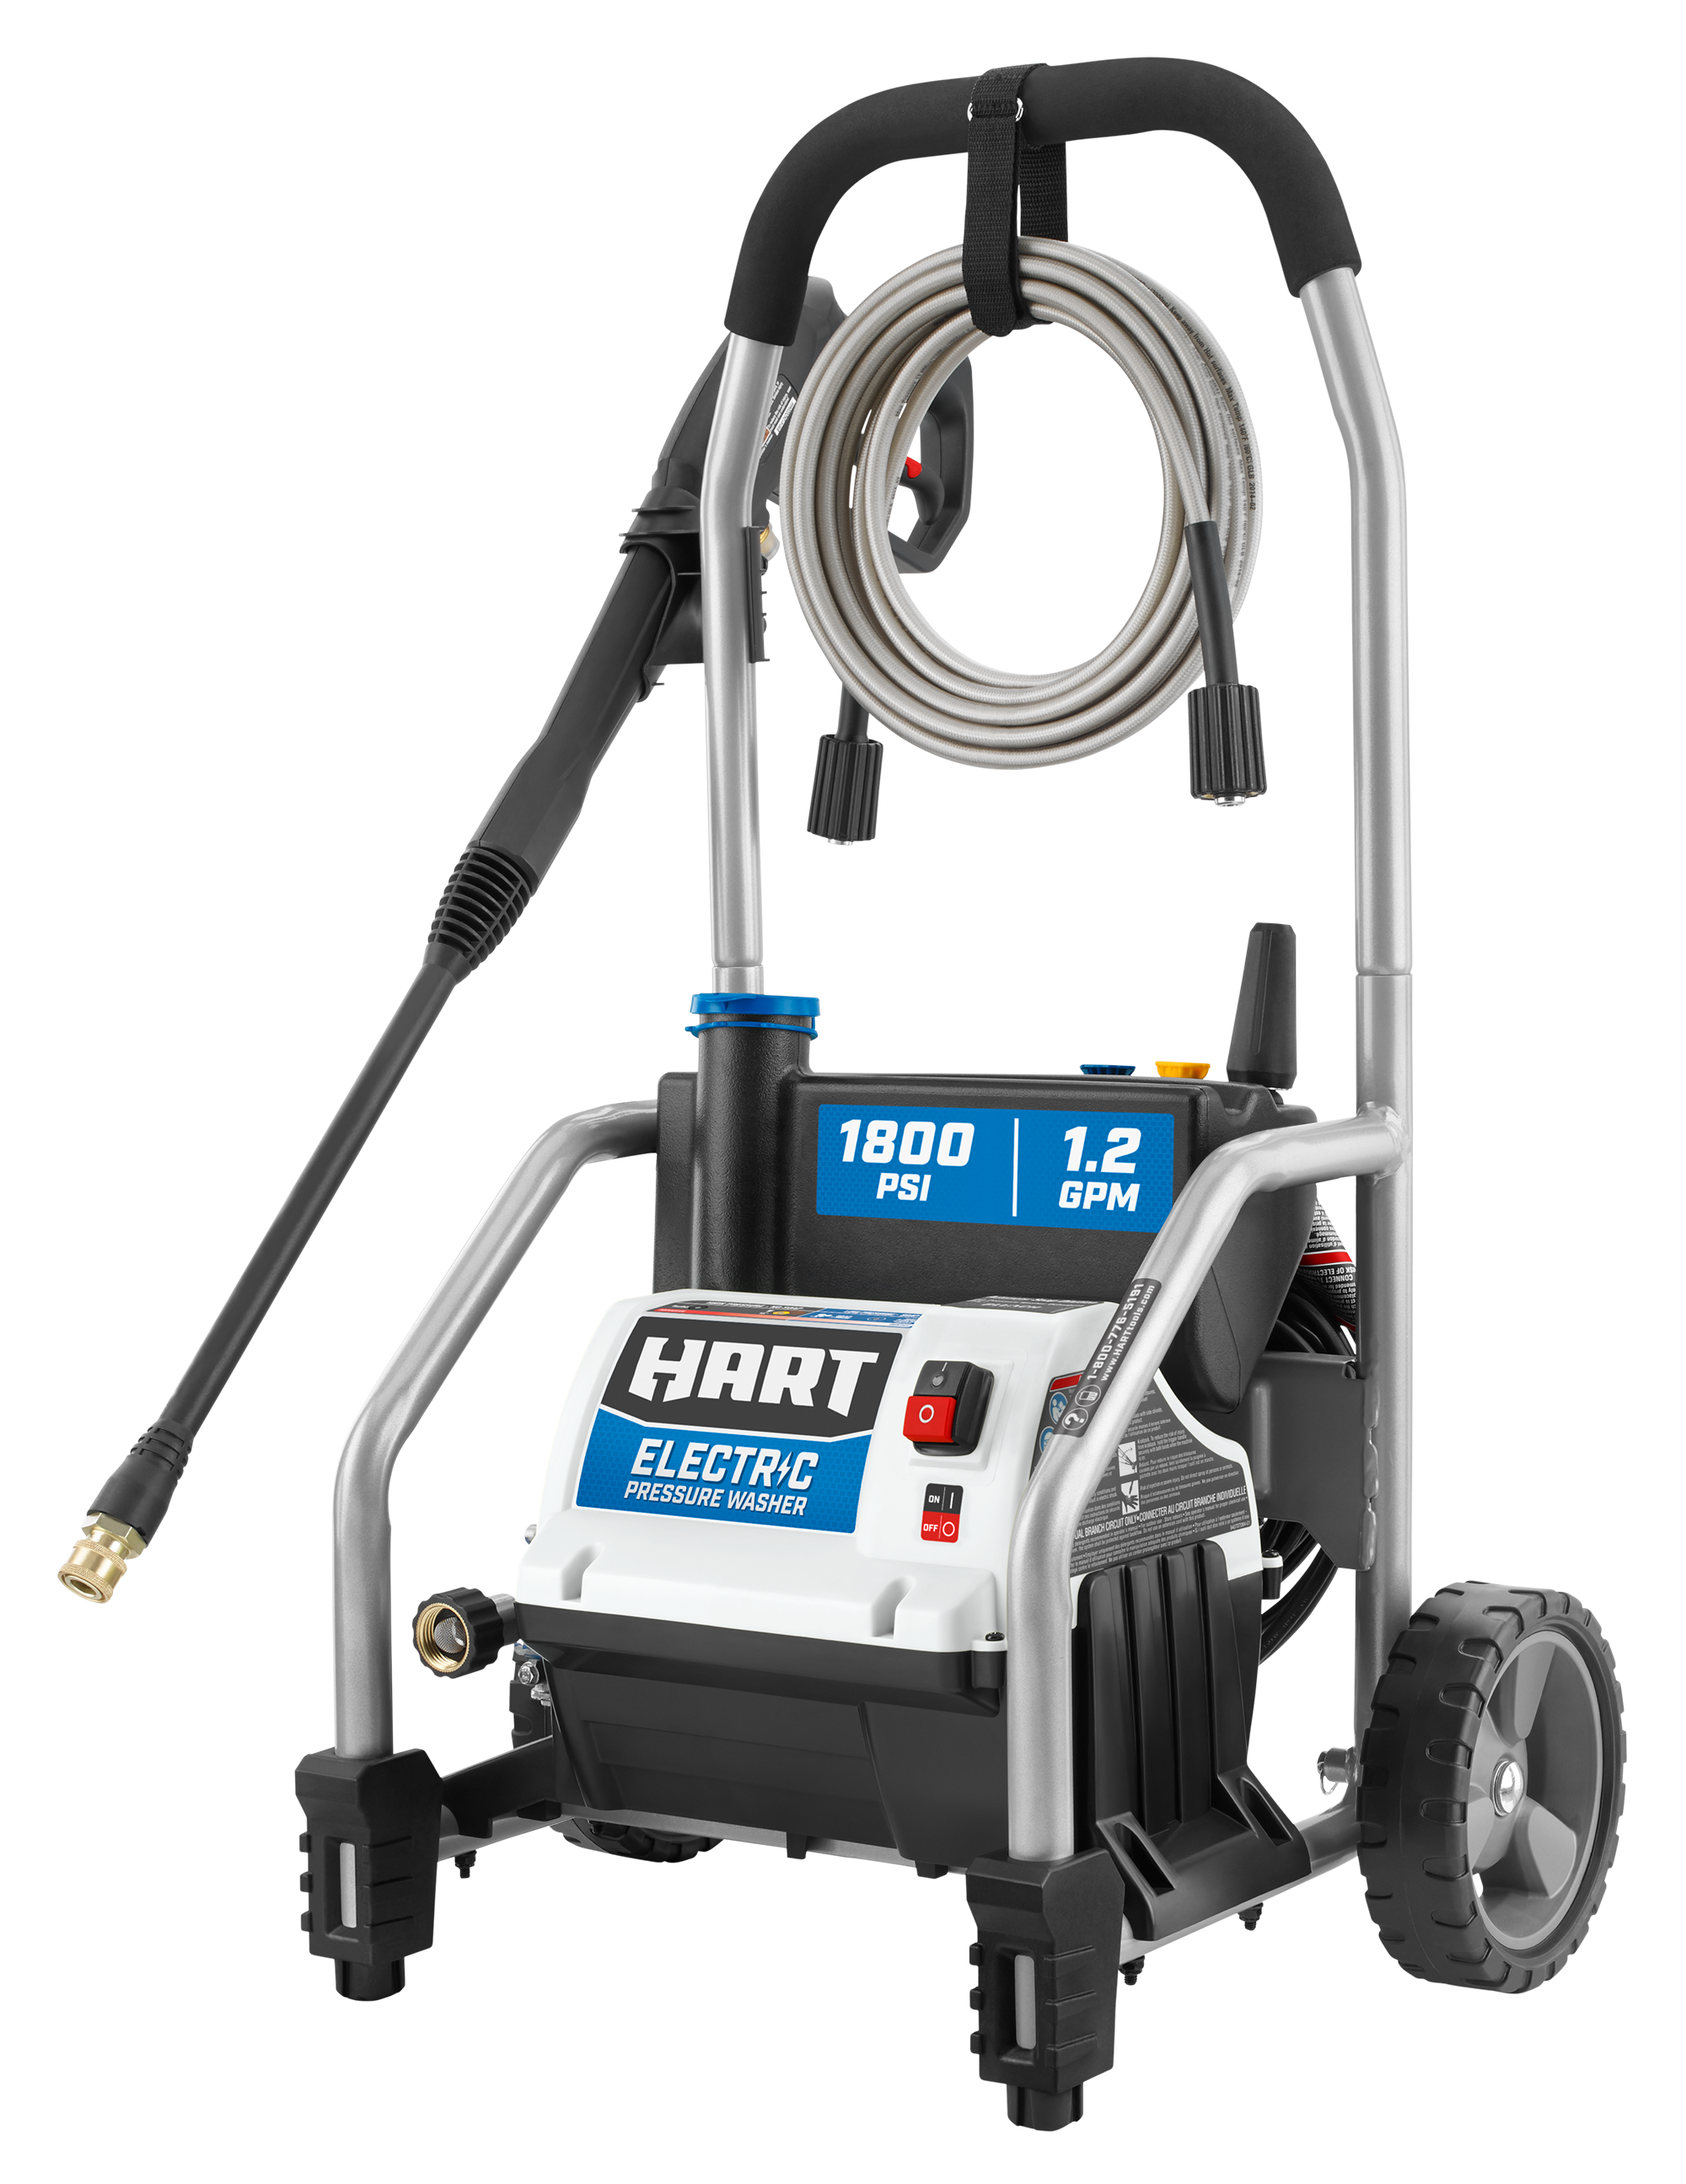 HART 1800 PSI at 1.2 GPM Electric Pressure Washer - image 3 of 10